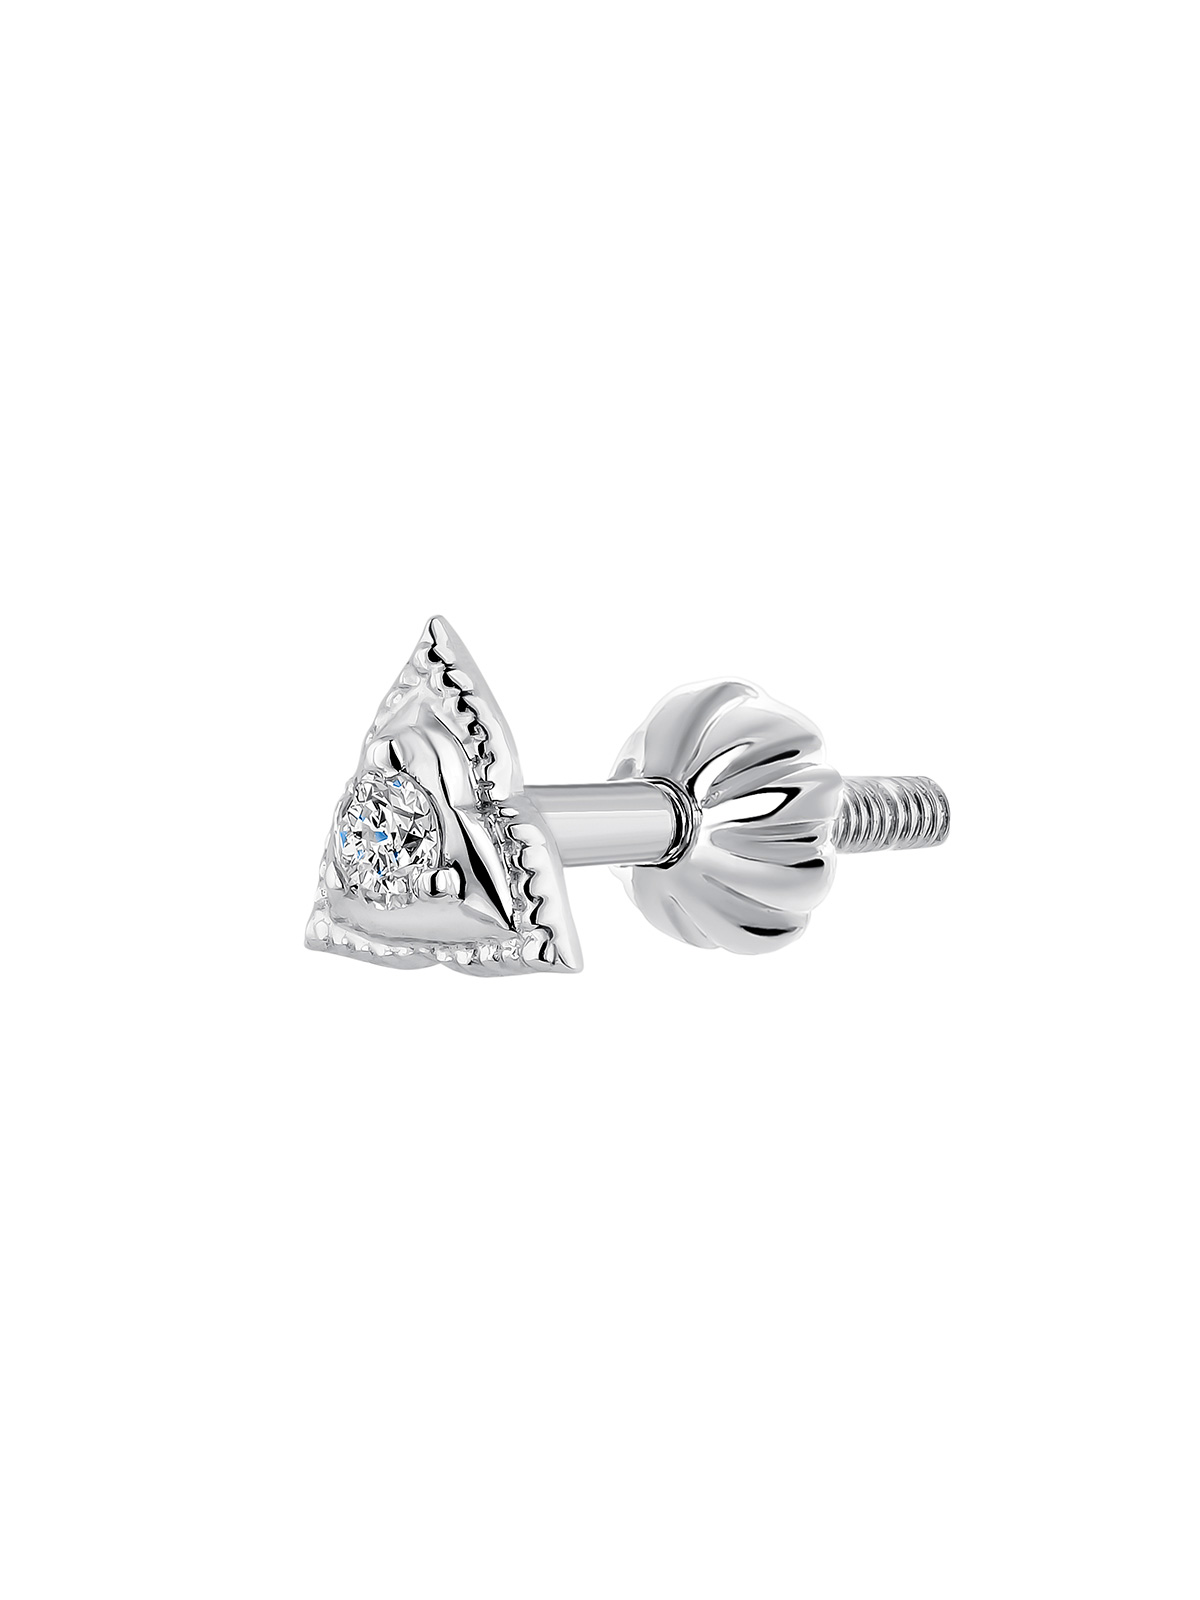 Single 9K white gold earring with diamond in a triangular shape.